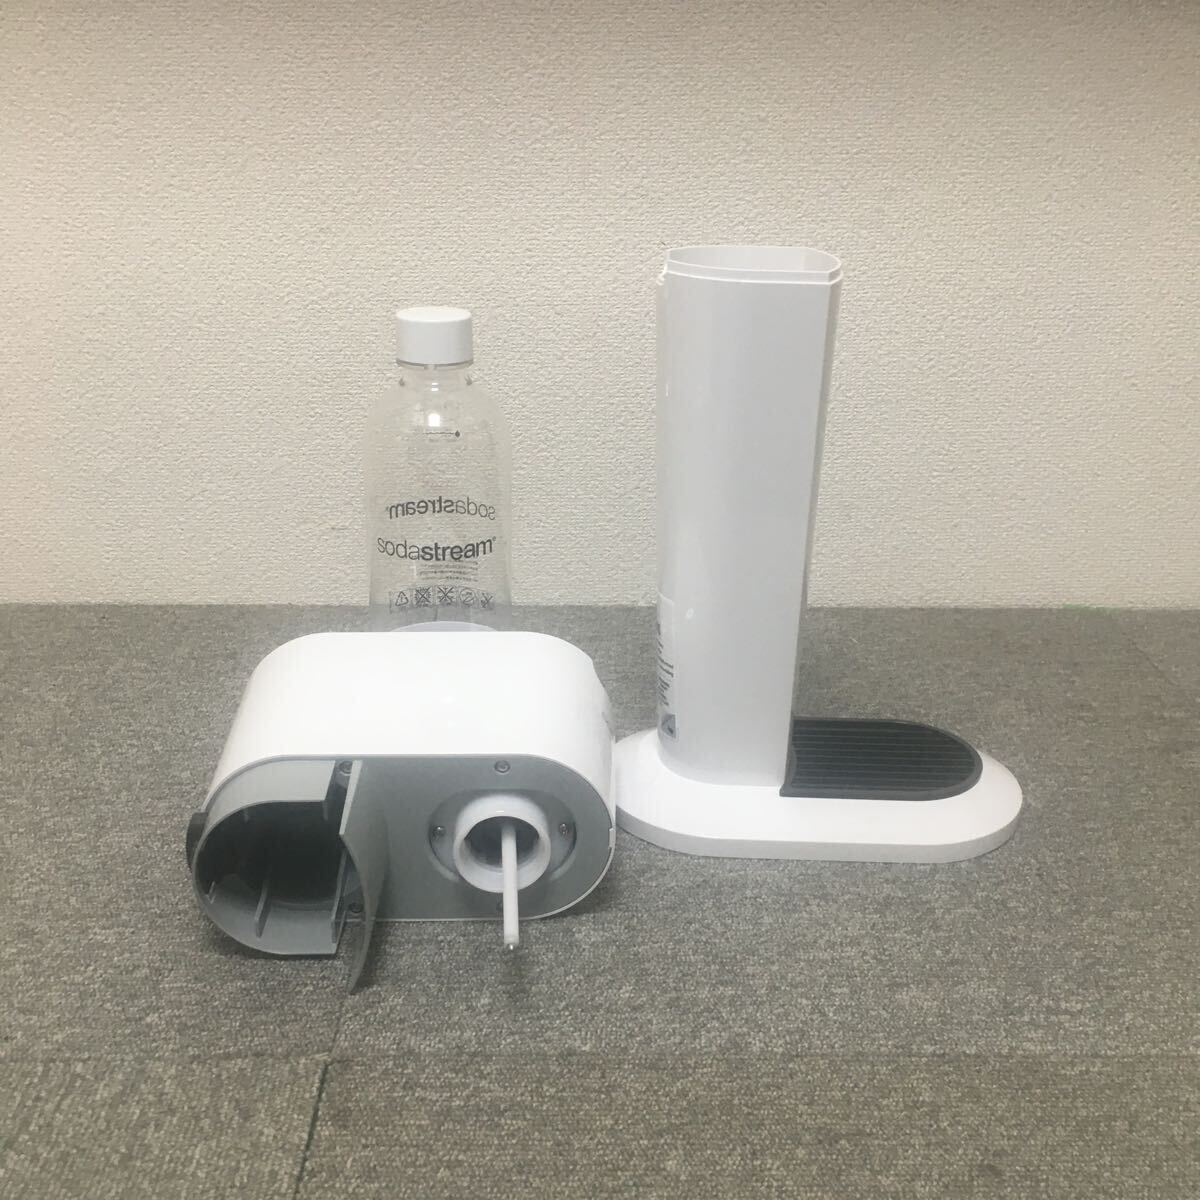  carbonated water Manufacturers sodastream soda Stream body bottle 